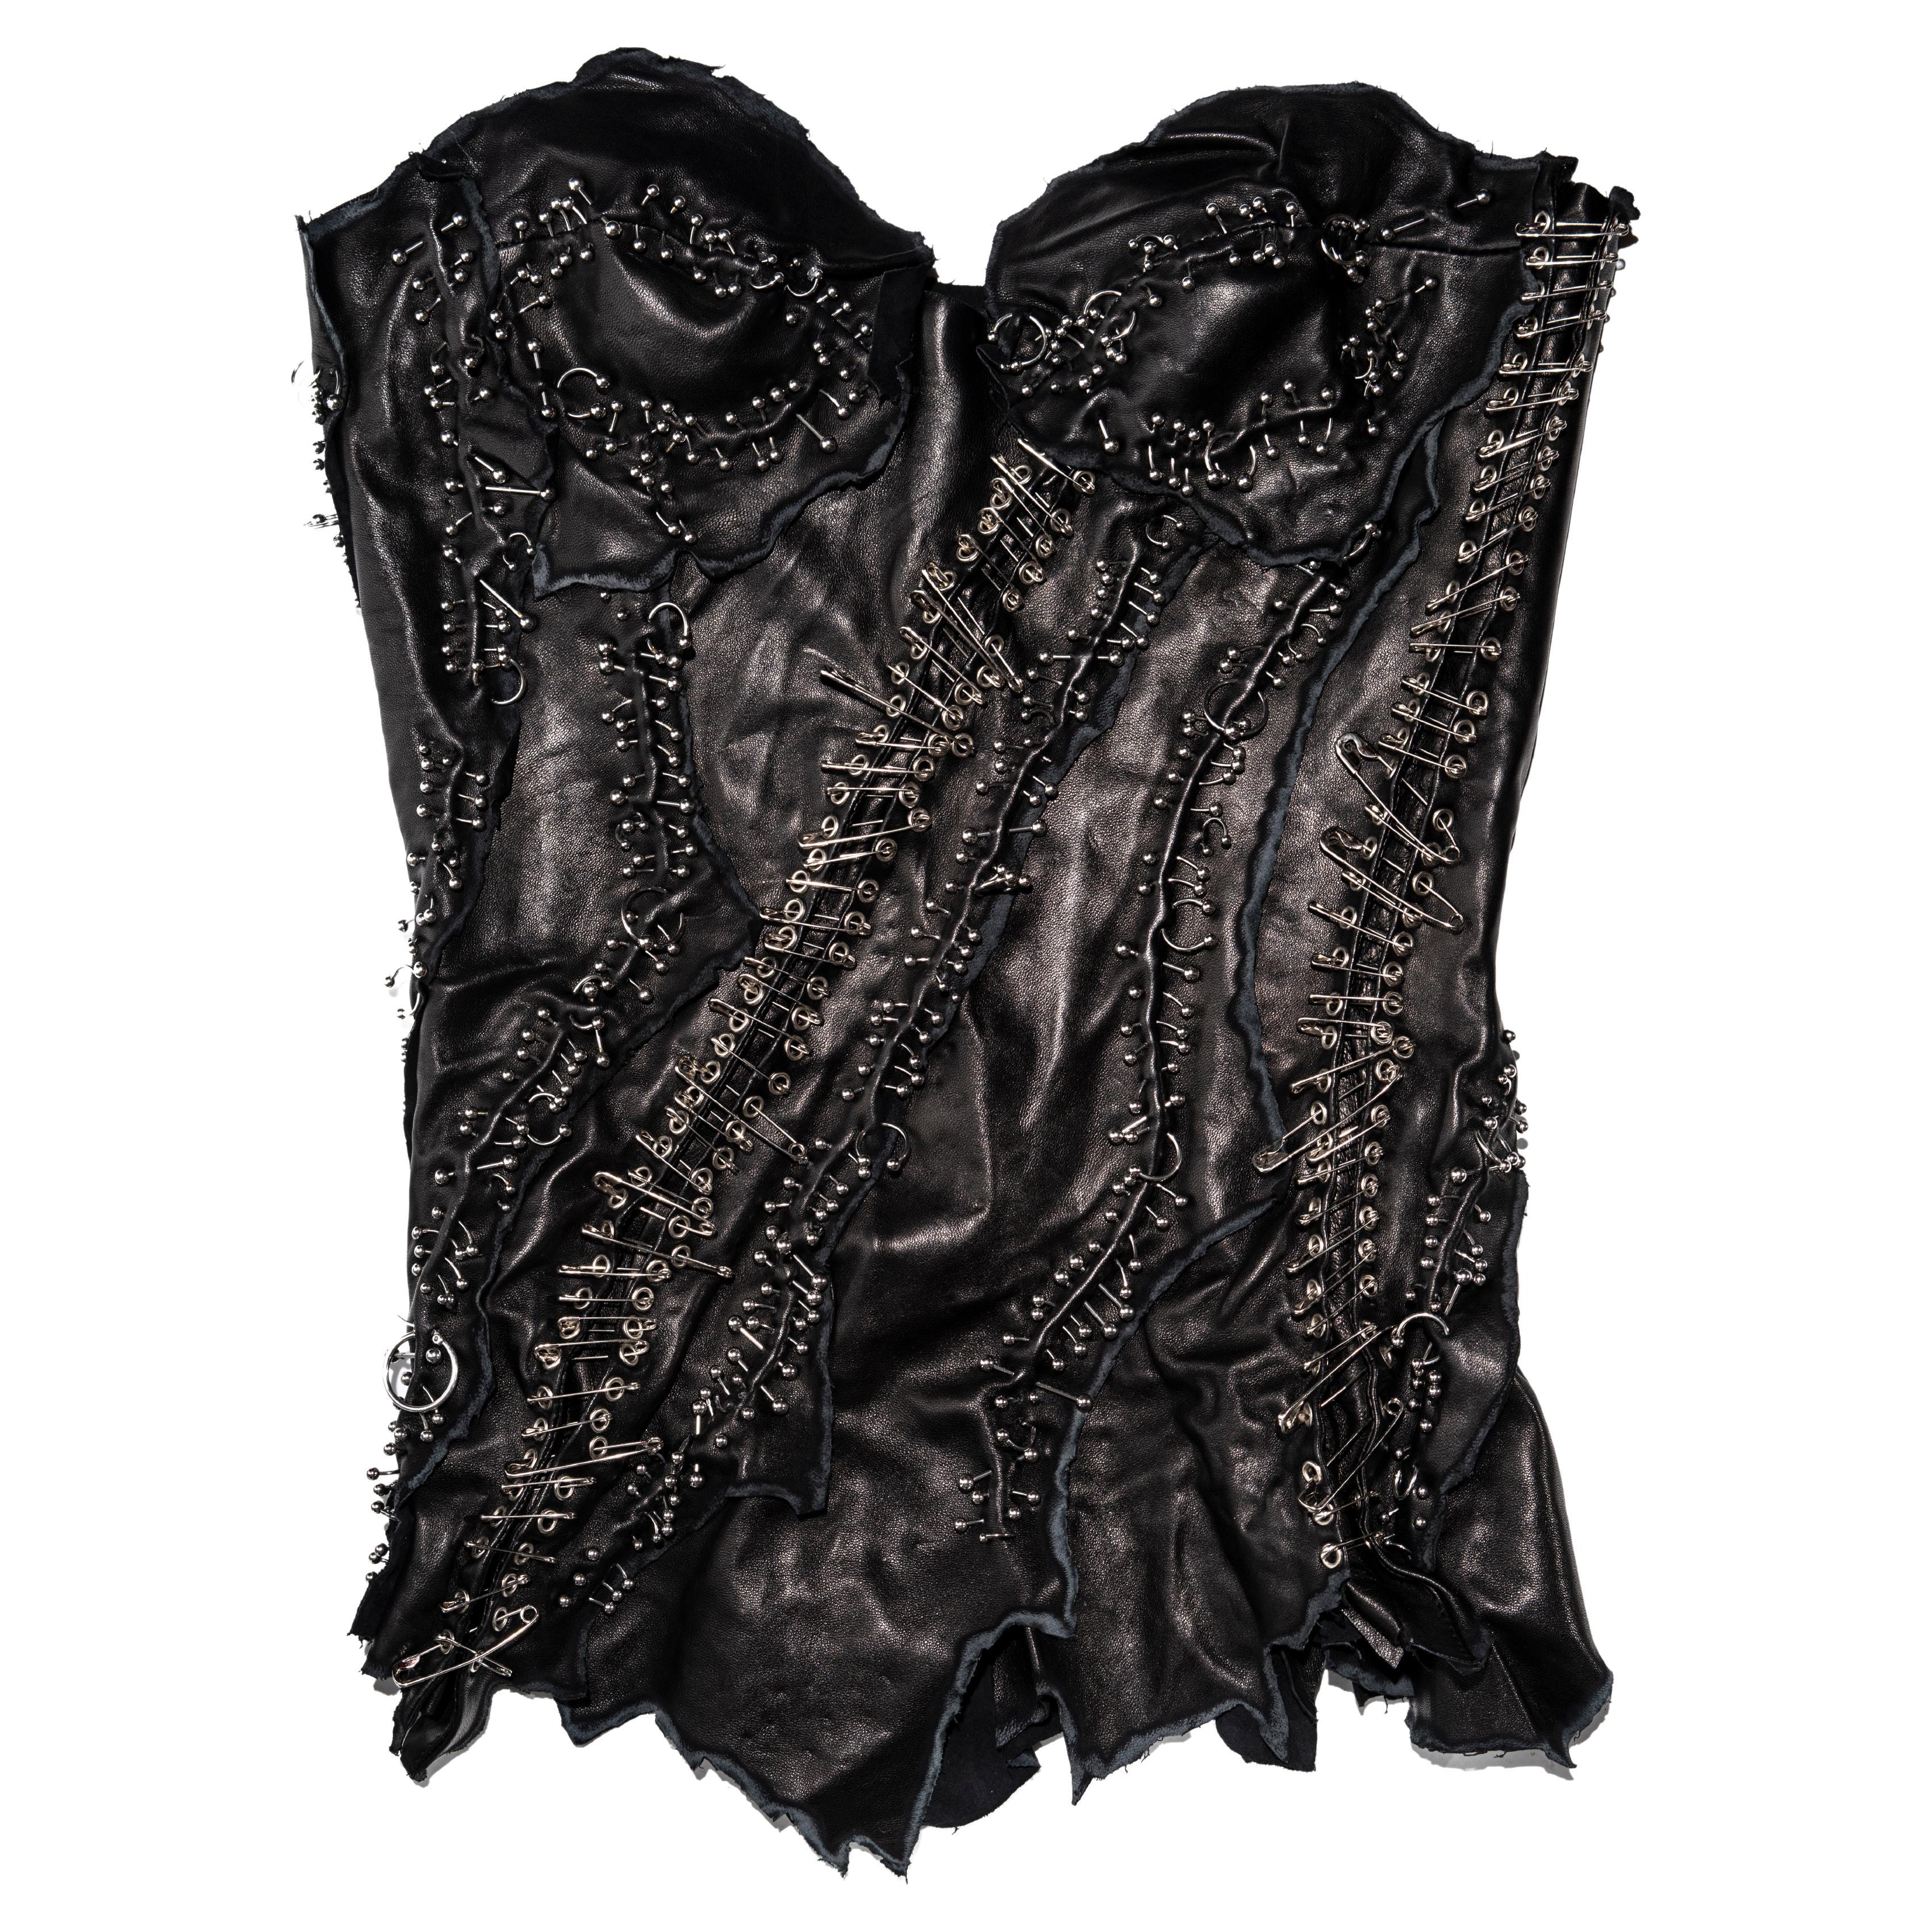 Balmain by Christophe Decarnin black leather safety-pin corset, ss 2011